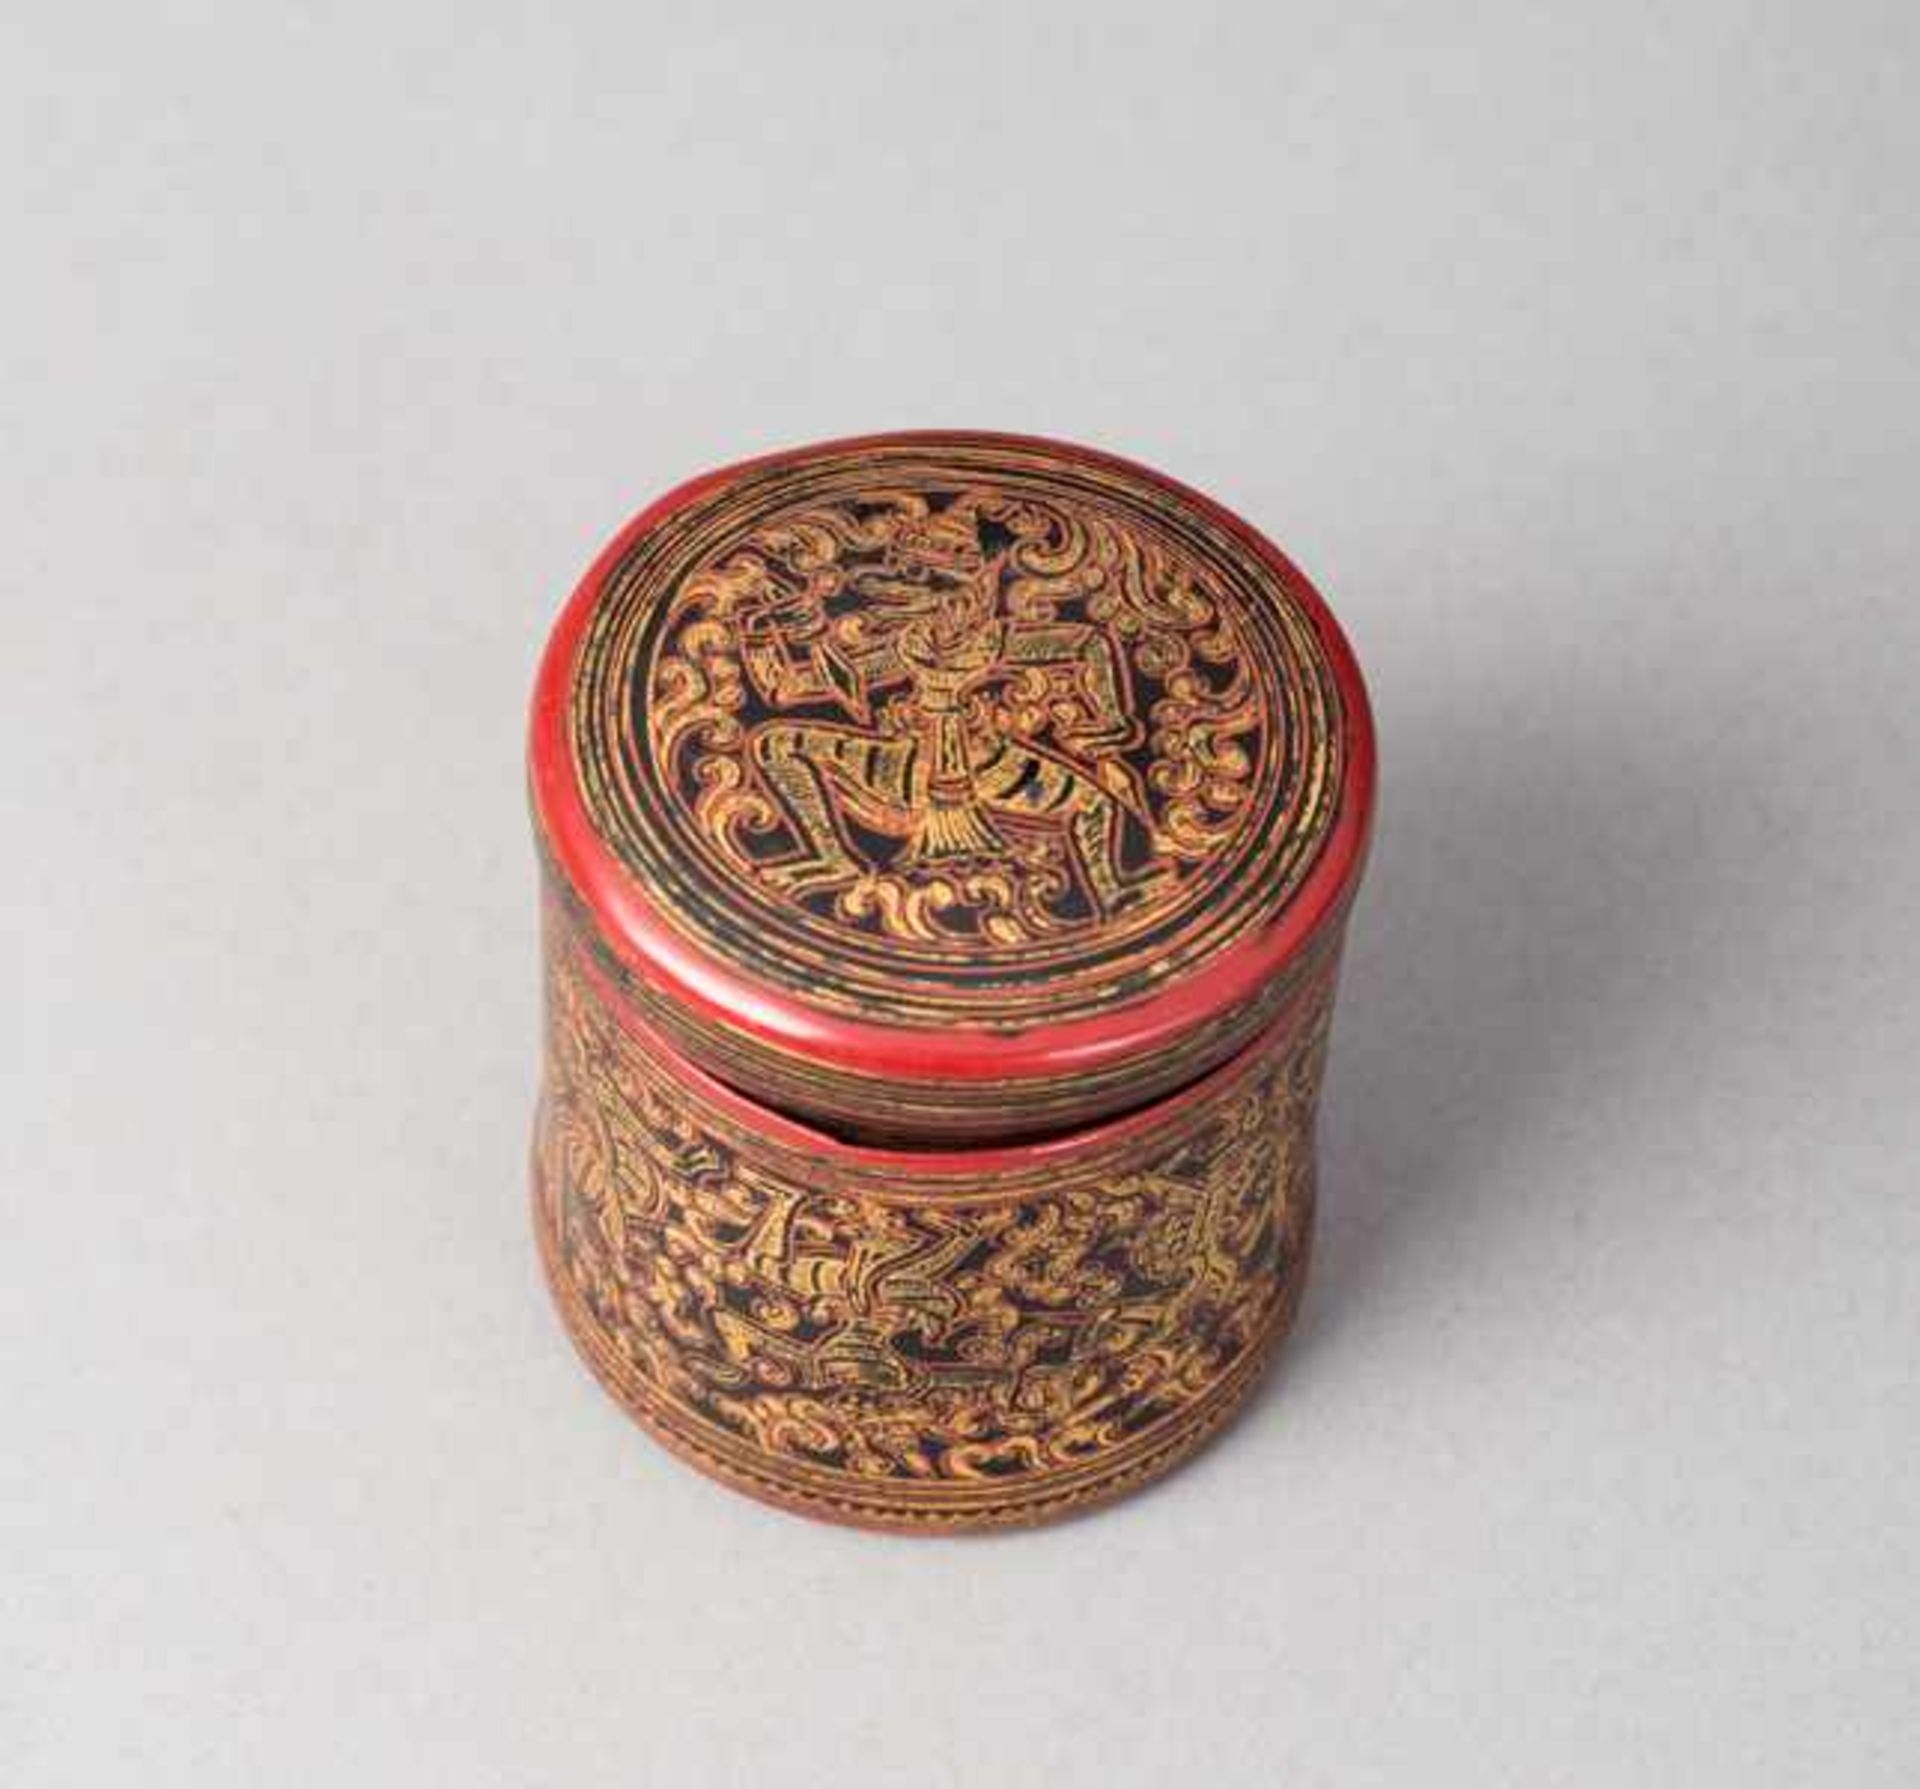 THREE ROUND BOXES WITH LIDS Bamboo, wood, lacquer and gilding. Burma, Three very nice, small boxes - Image 4 of 9